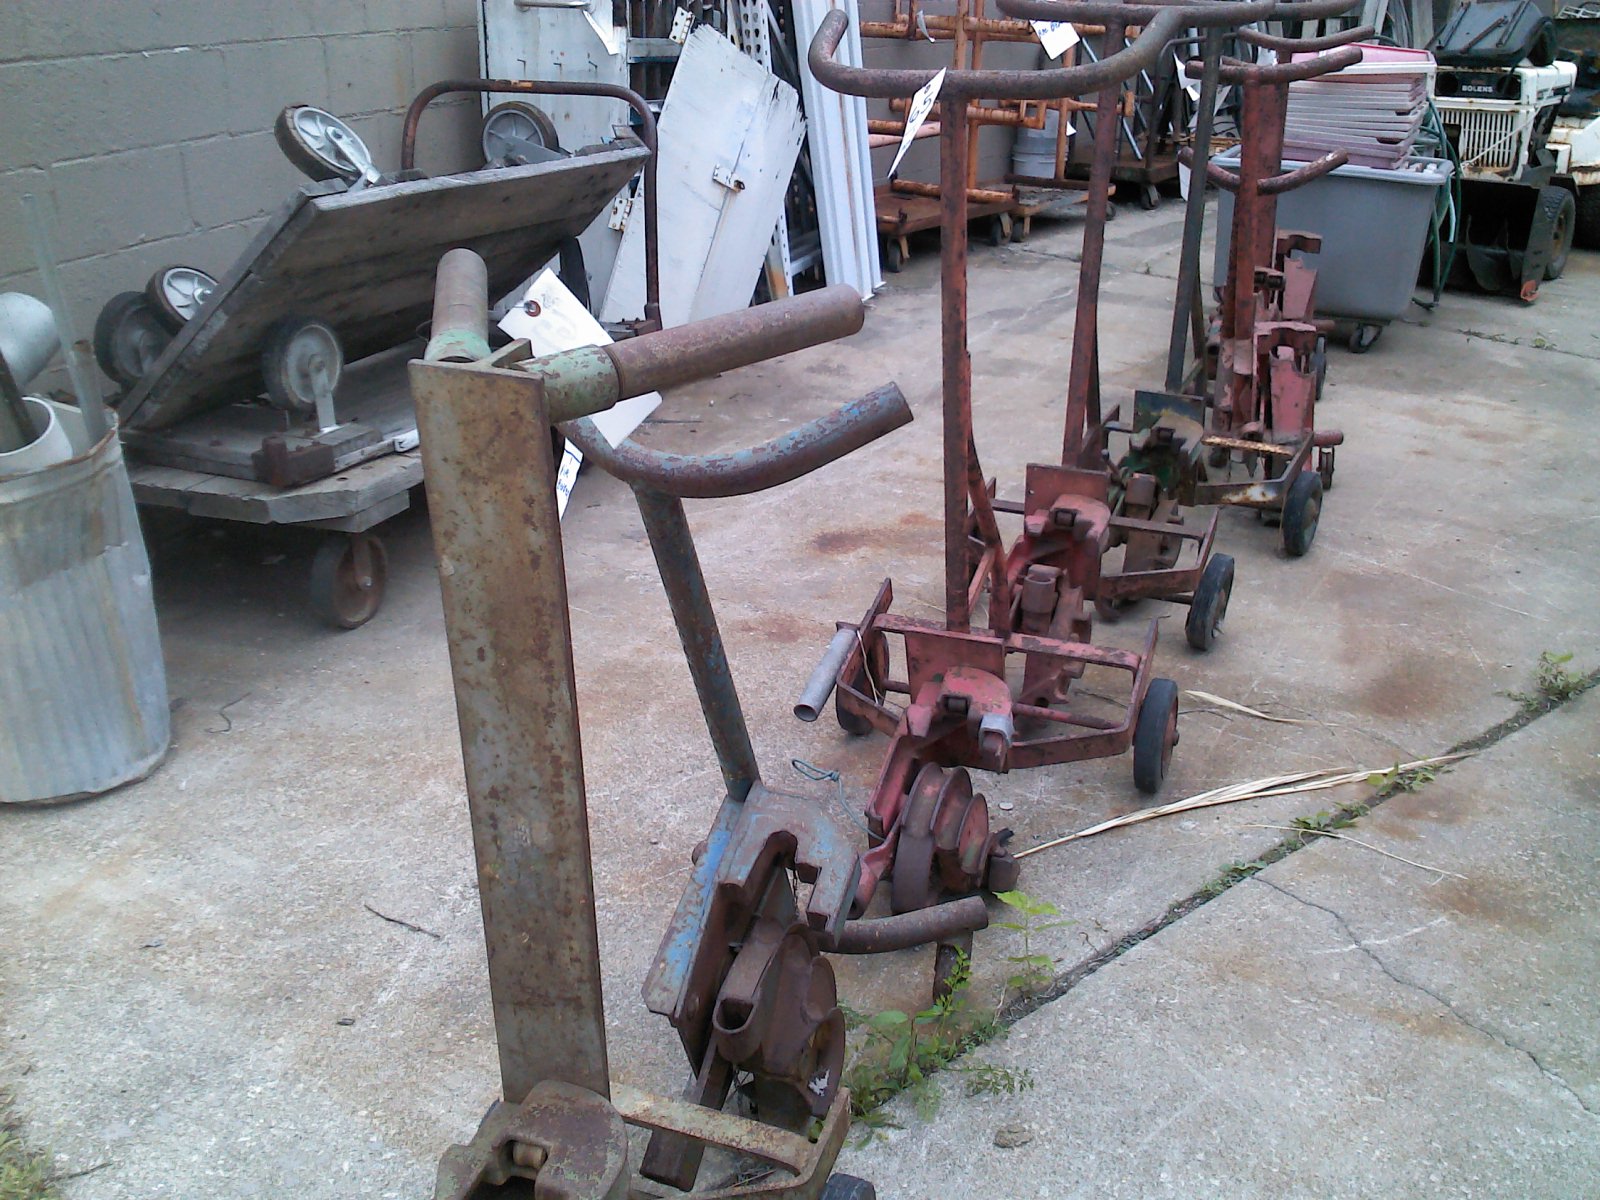 Grossman Auction Pictures From October 1, 2013 - 20298 St. Clair Ave  Cleveland Ohio 44119